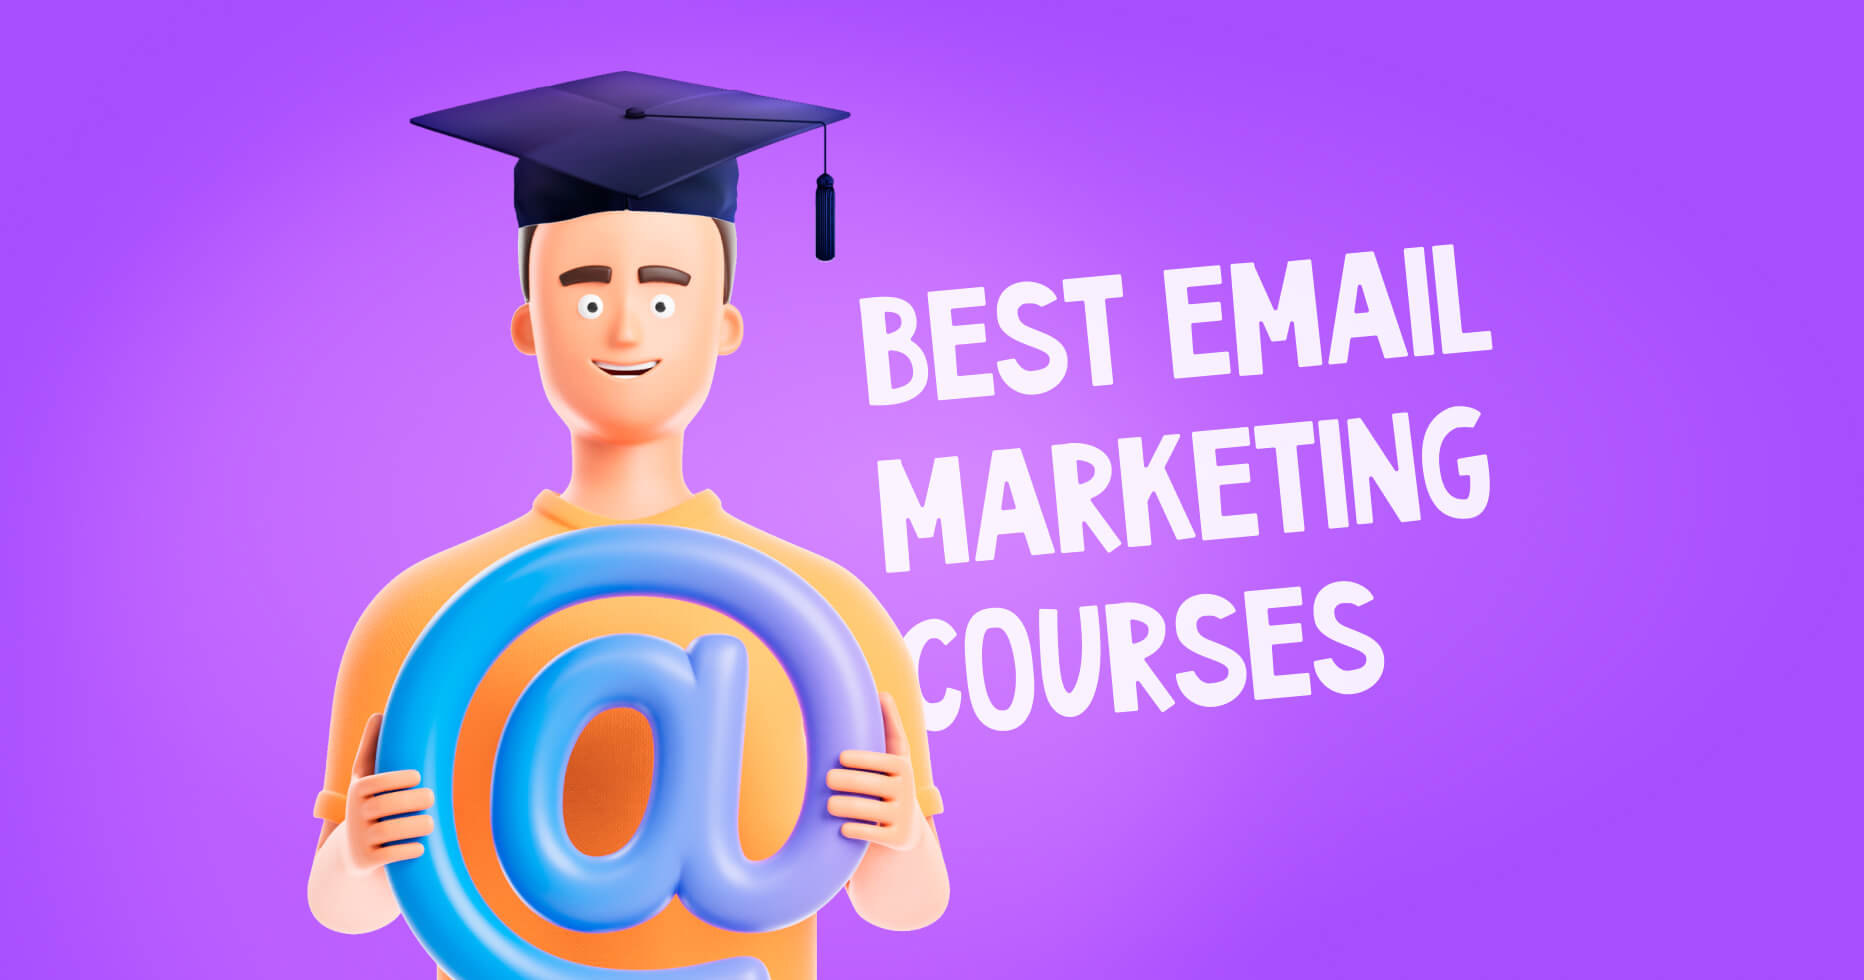 21 best email marketing courses for 2021